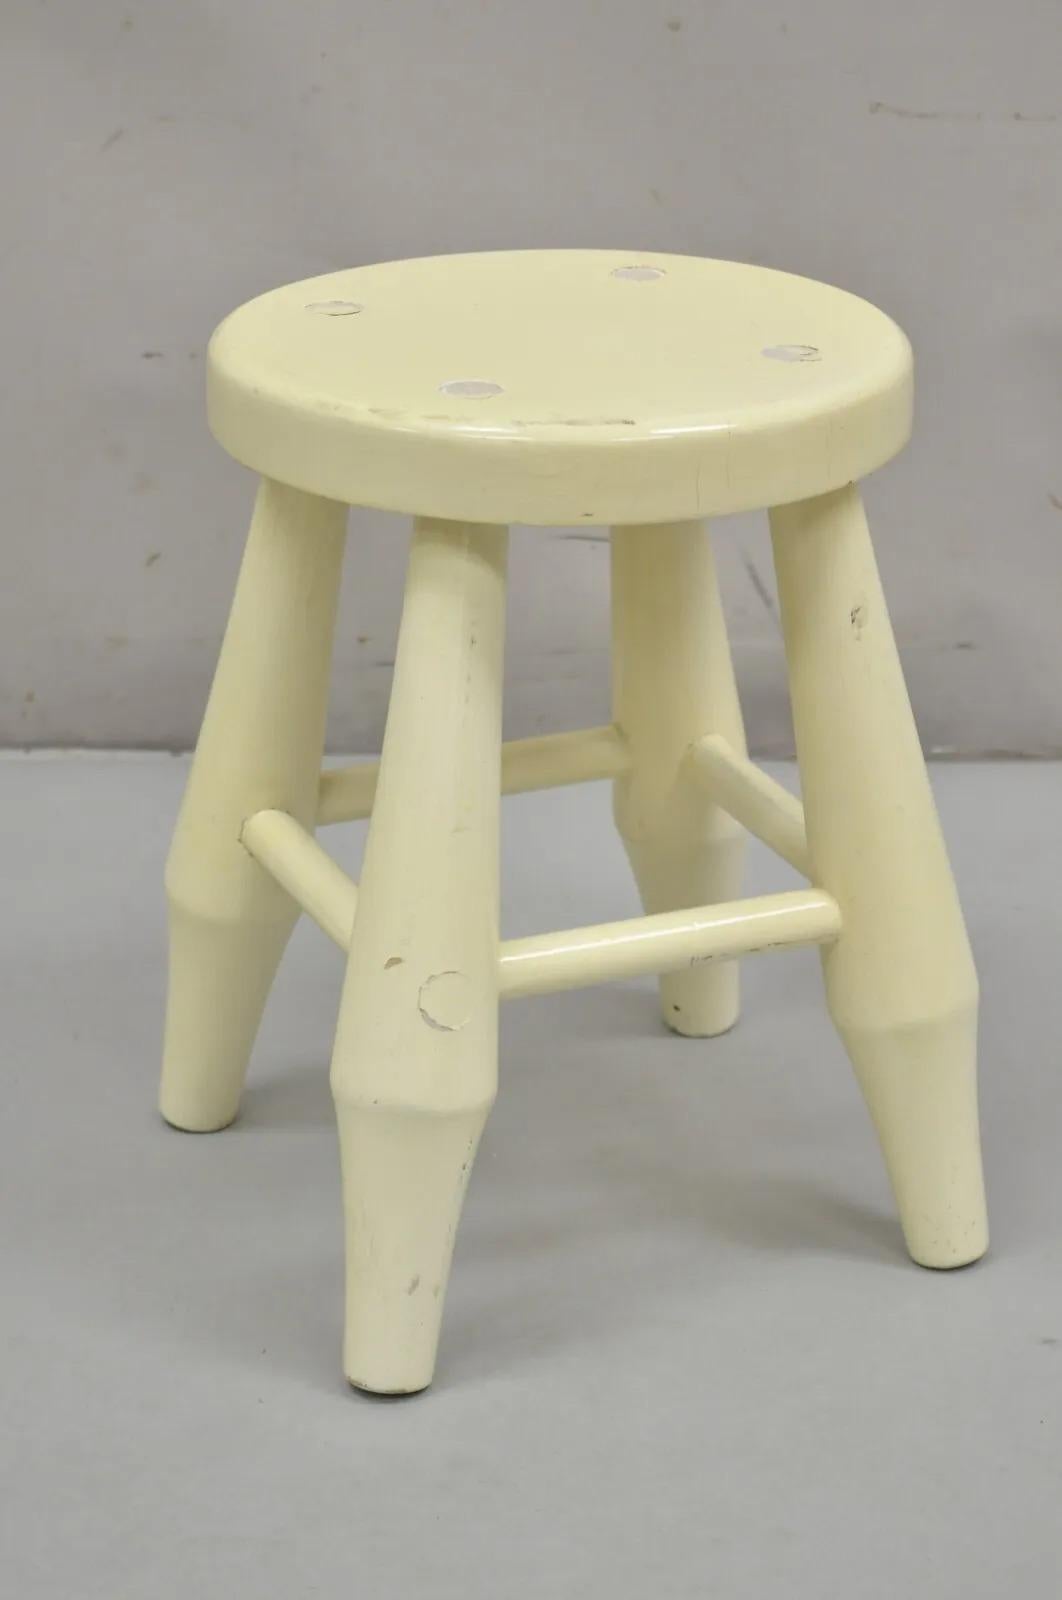 Vintage Primitive Modern Wooden Milking Stool with Bulbous Legs Lacquer Finish For Sale 5